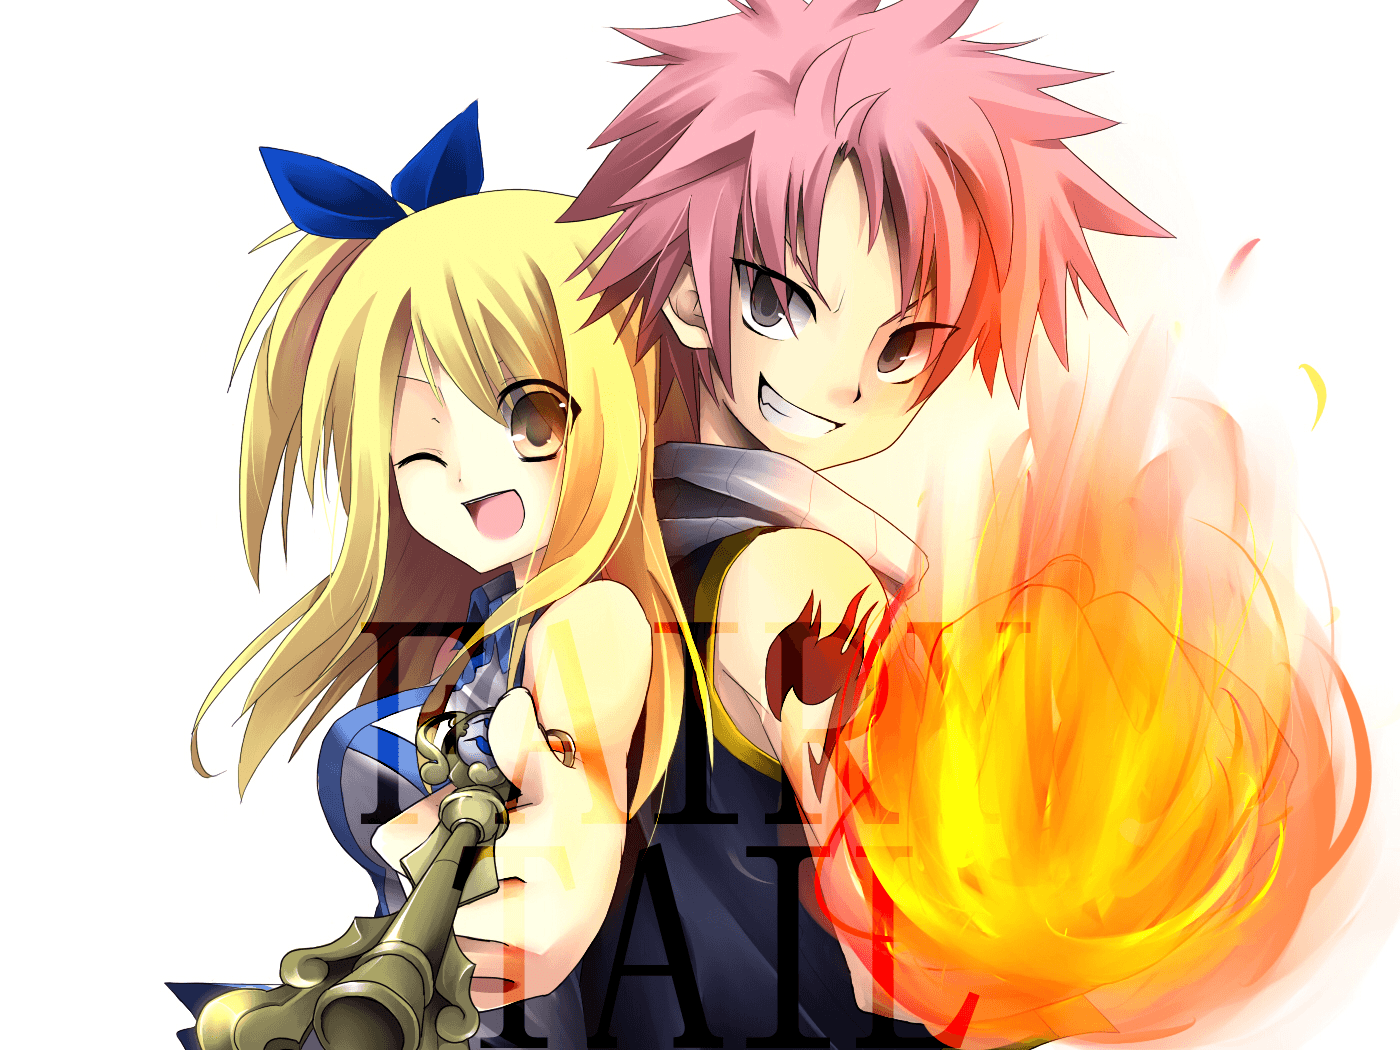 Lucy Fairy Tail Wallpaper. Fairy tail photo, Fairy tail anime